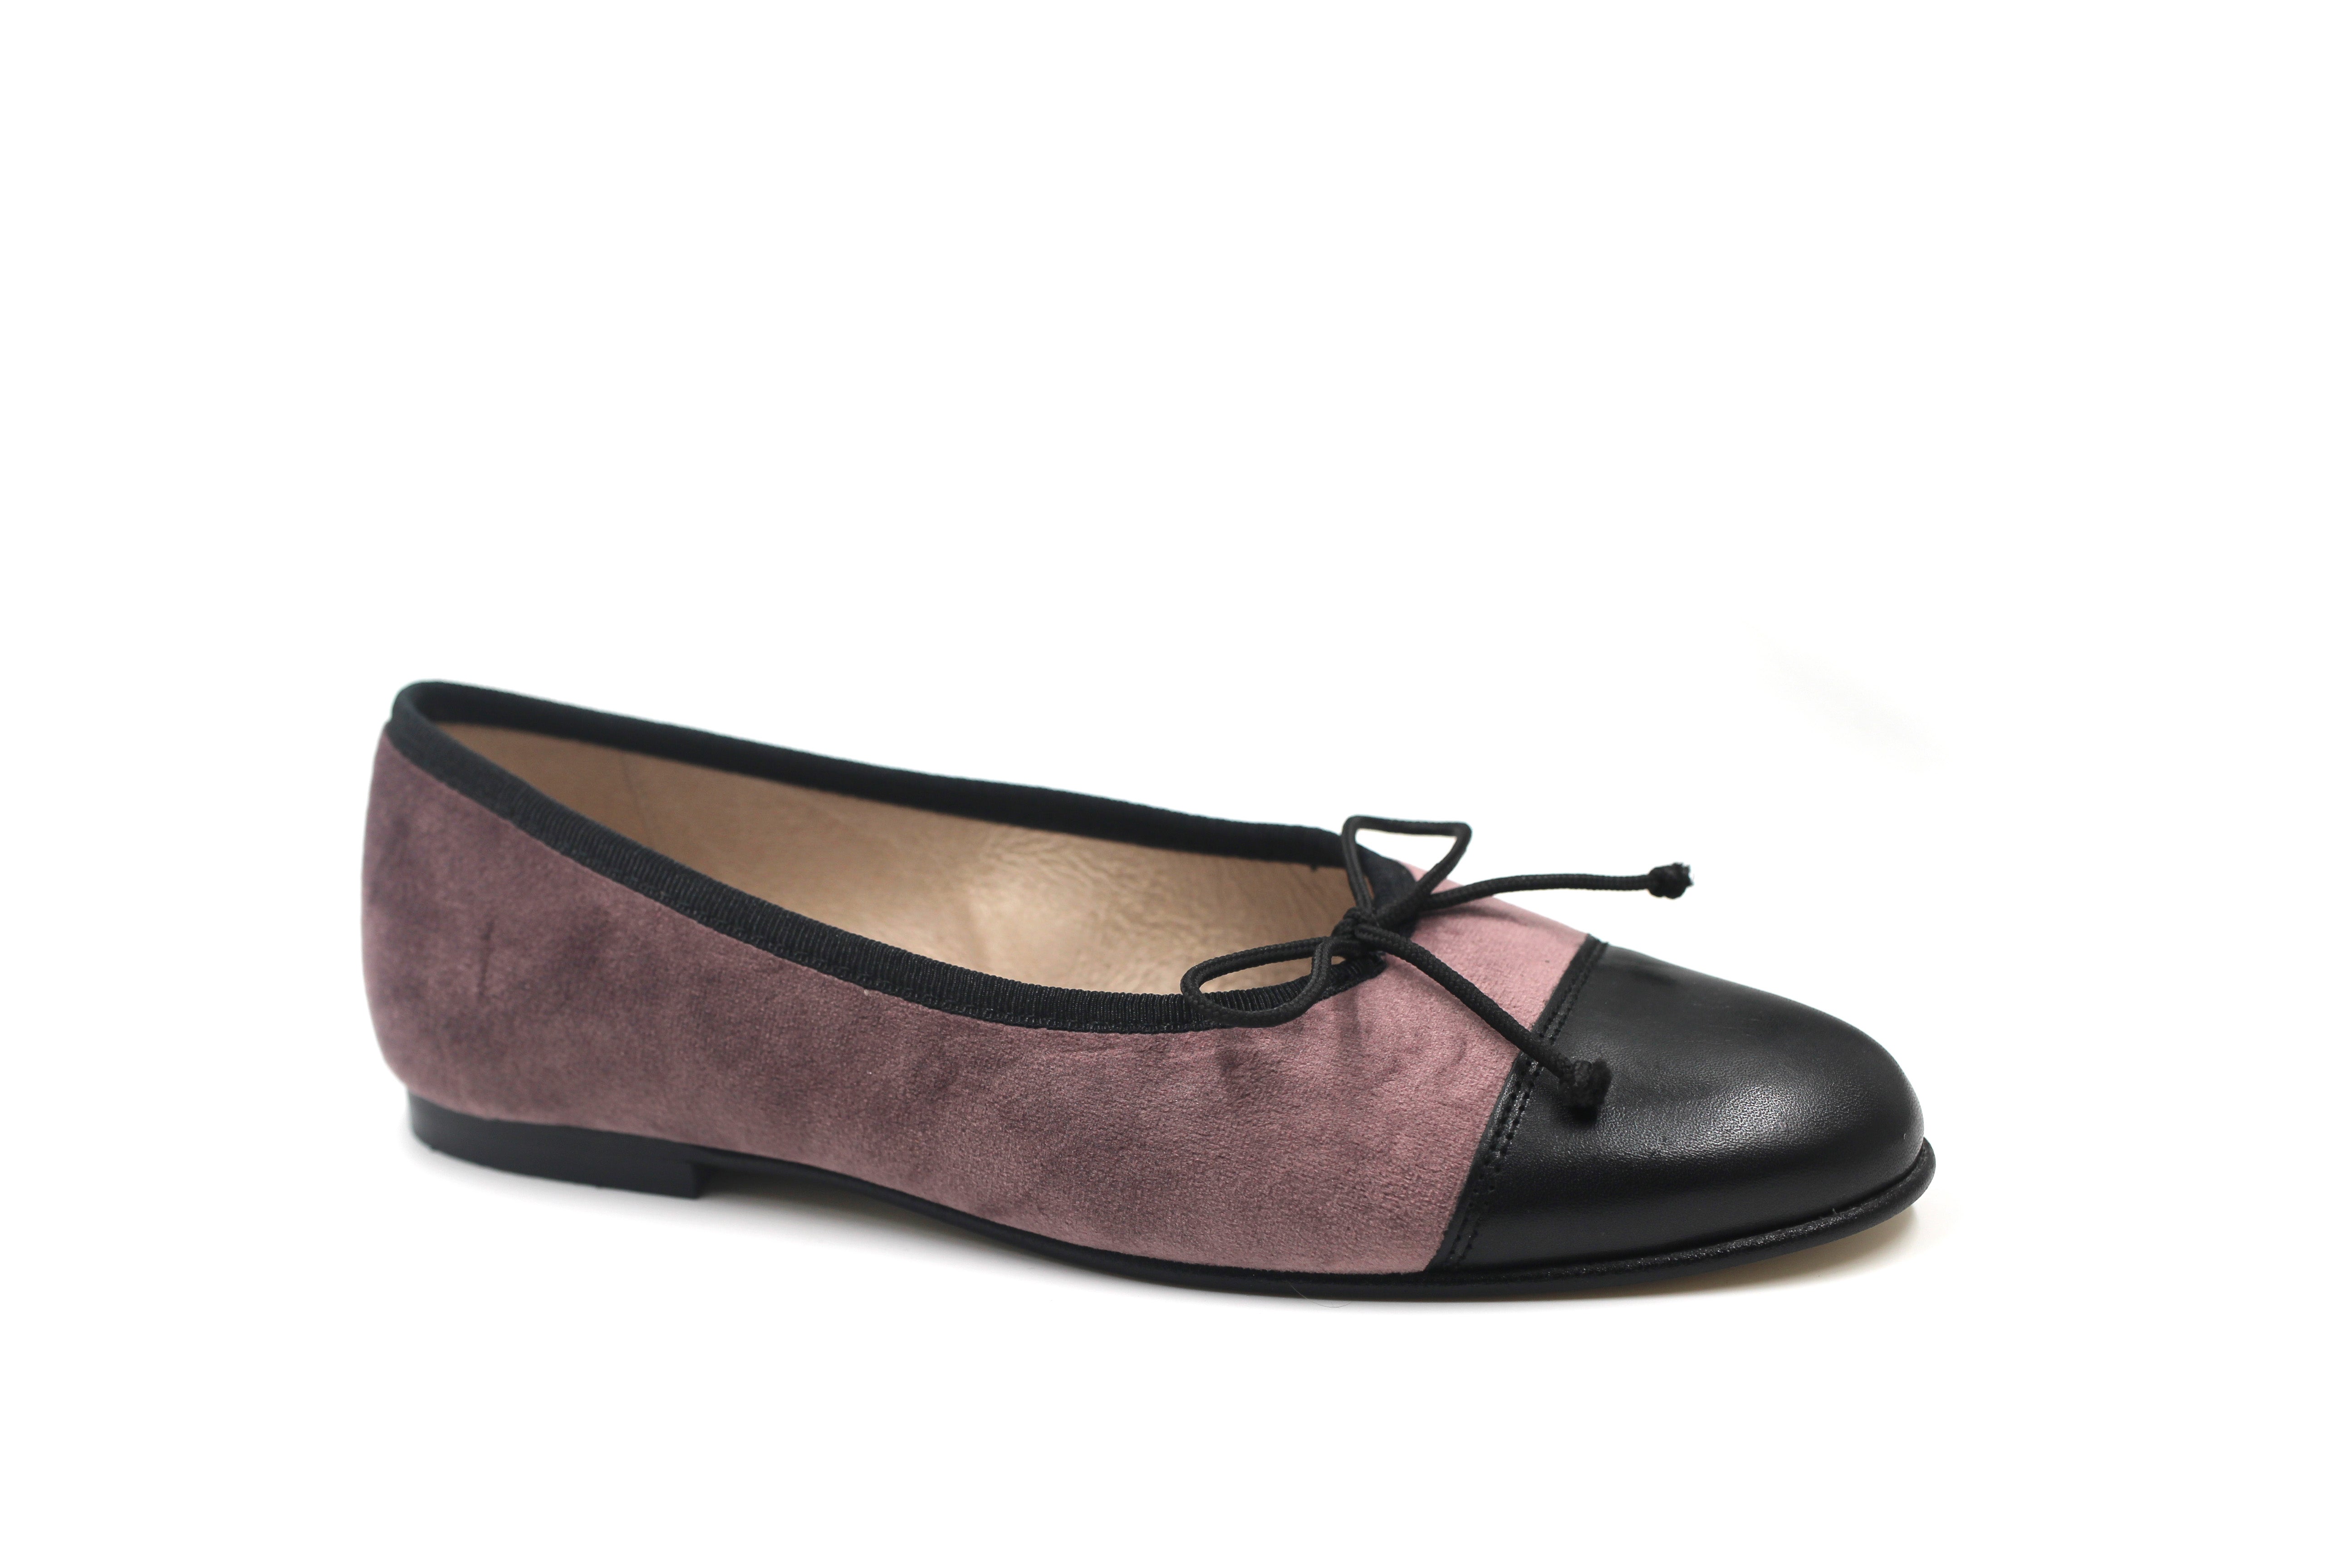 Valencia Lilac Ballet Flat with Leather Cap